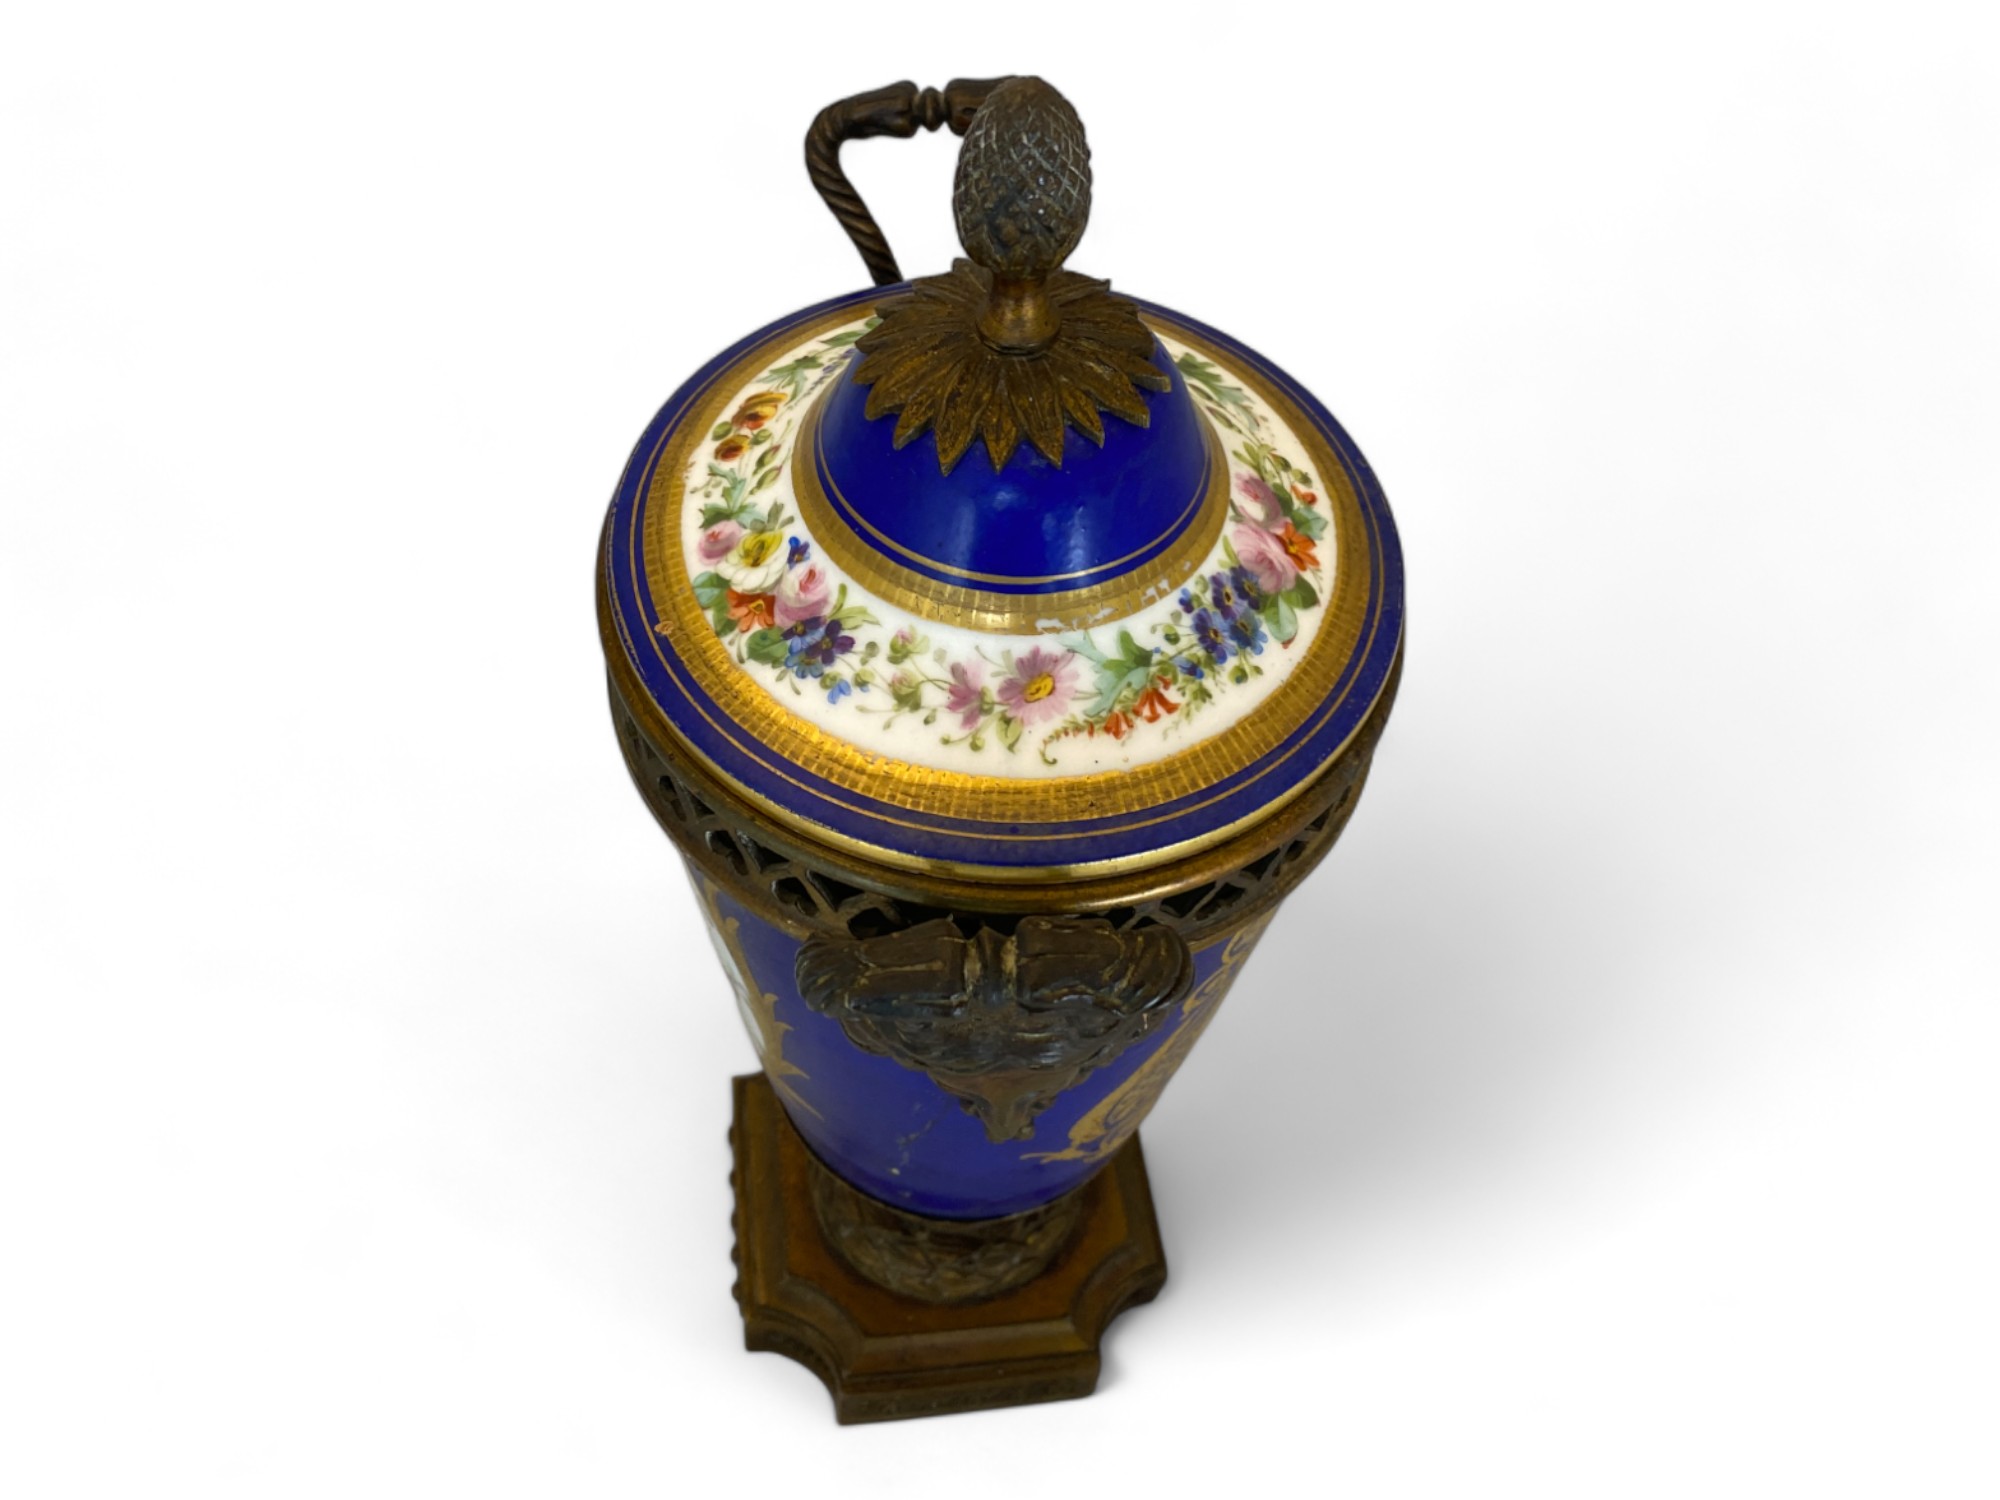 A 19th century Sèvres style porcelain and gilt bronze mounted beau bleu cup and cover - Image 5 of 10